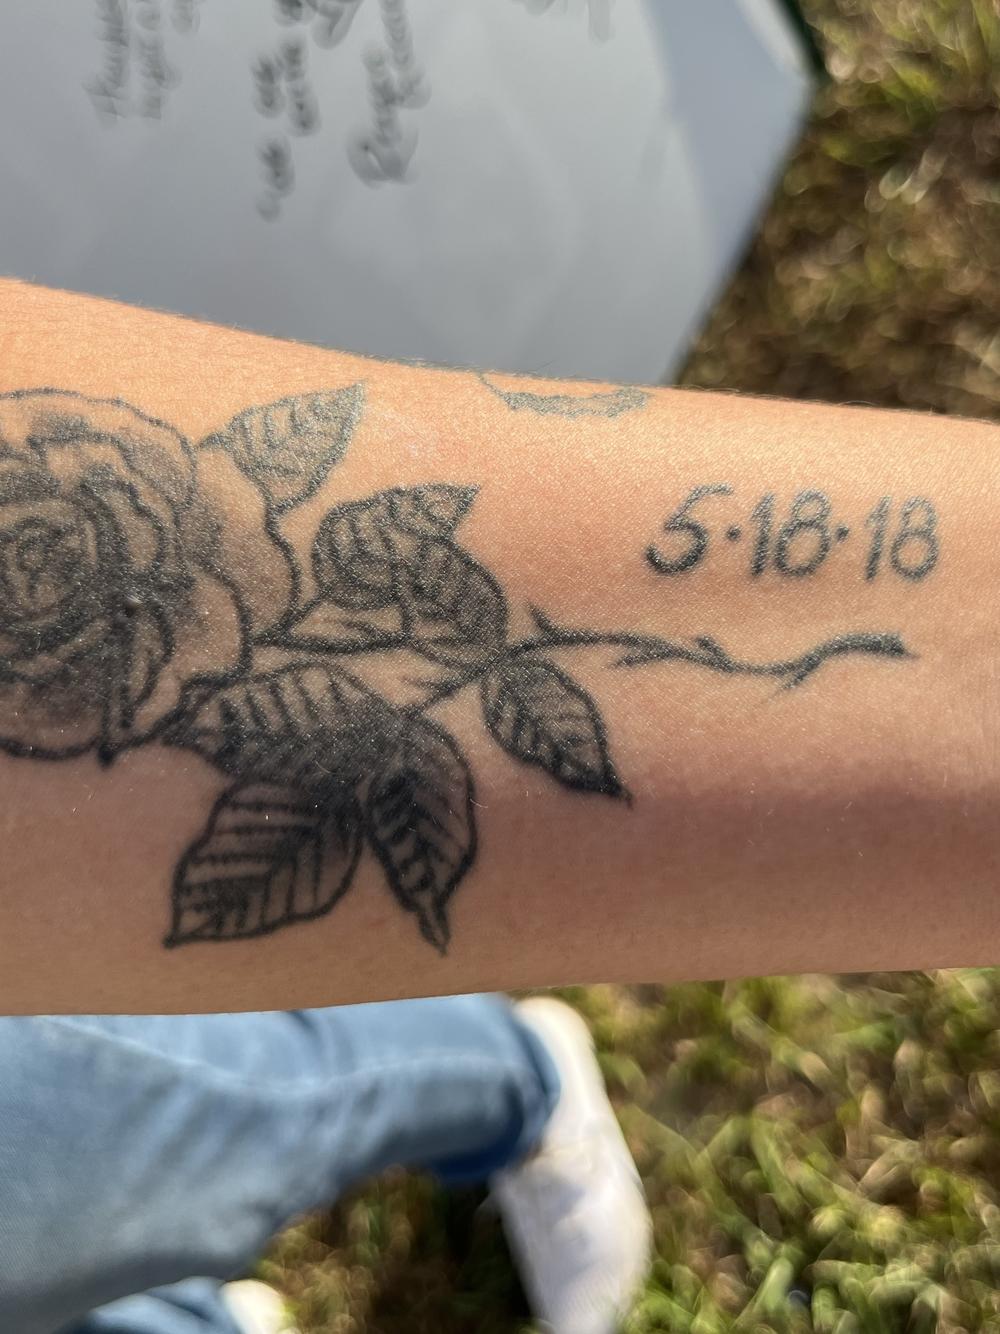 Reagan Gaona's rose tattoo includes the date of the Santa Fe High School shooting: May 18, 2018. Her boyfriend, Chris Stone, was among those killed.